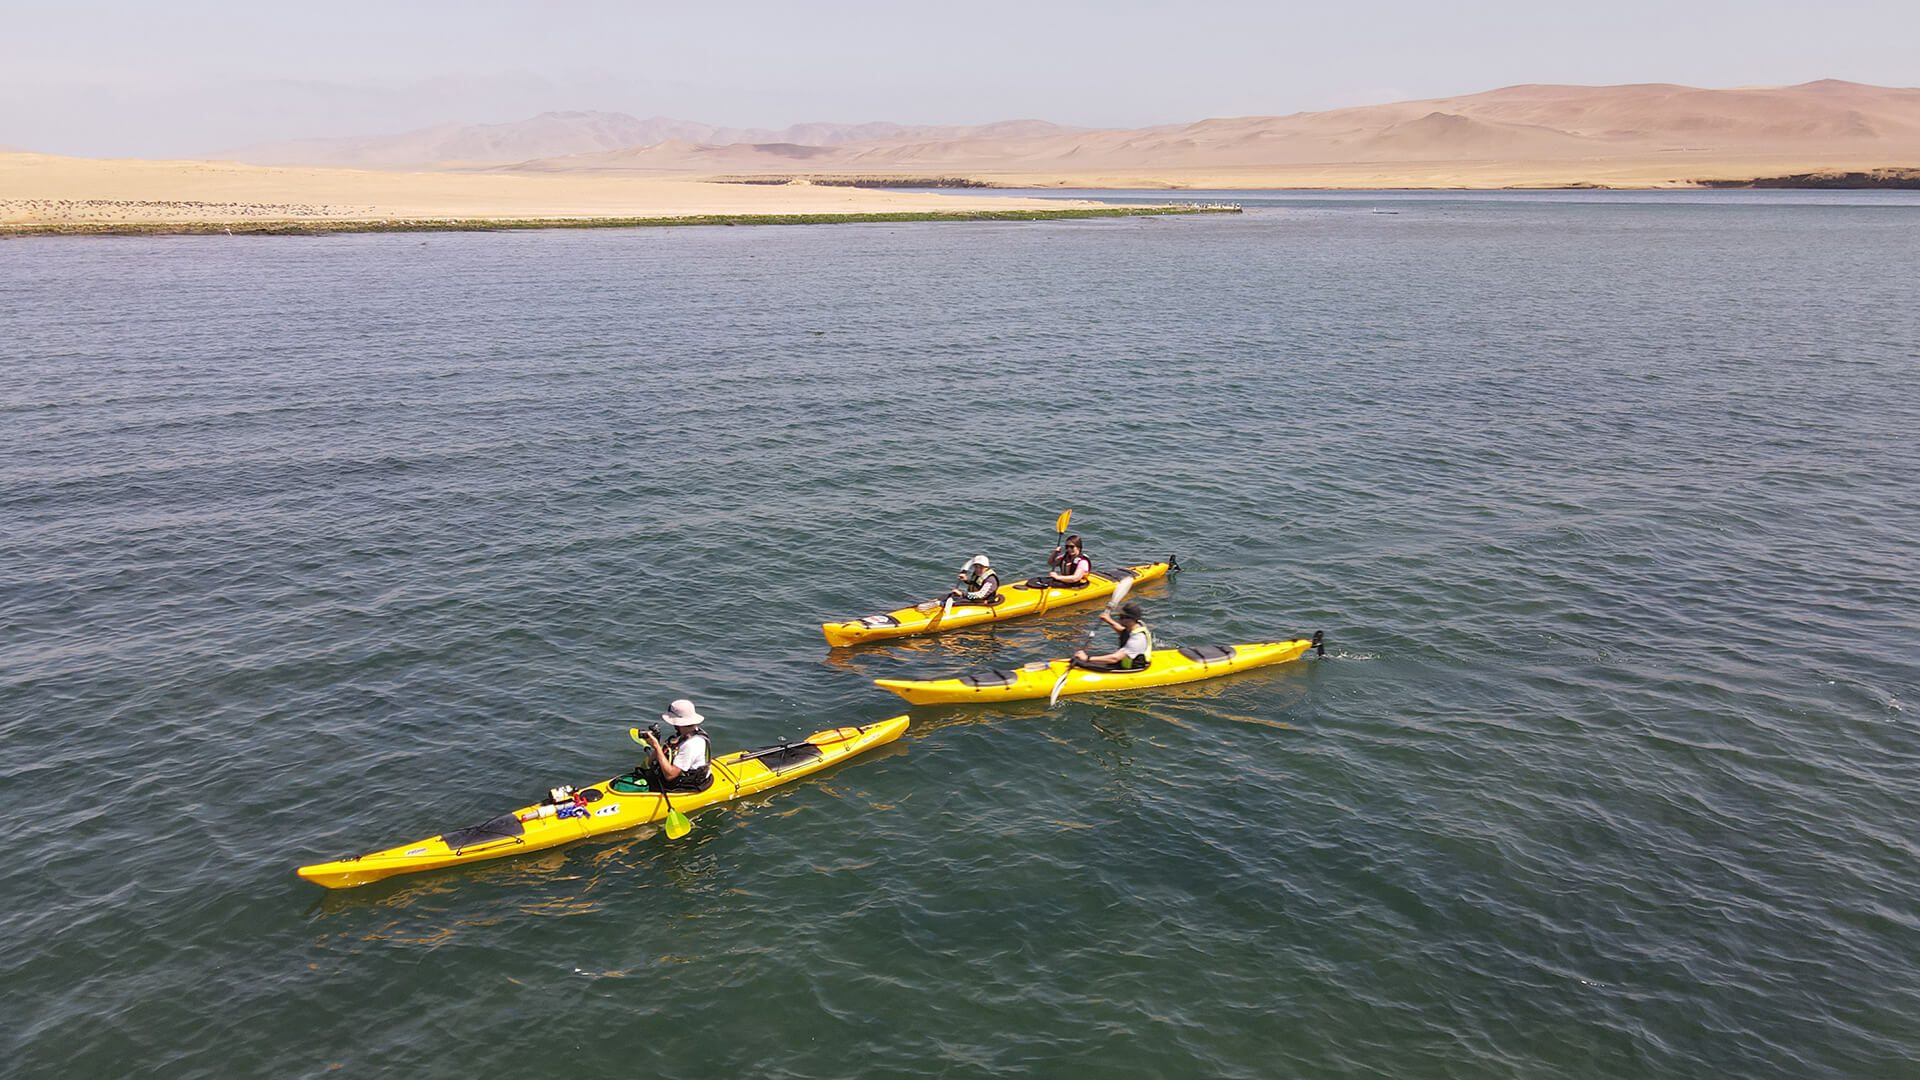 One tandem and two single kayaks from the air in Paracas bay - RESPONSible Travel Peru